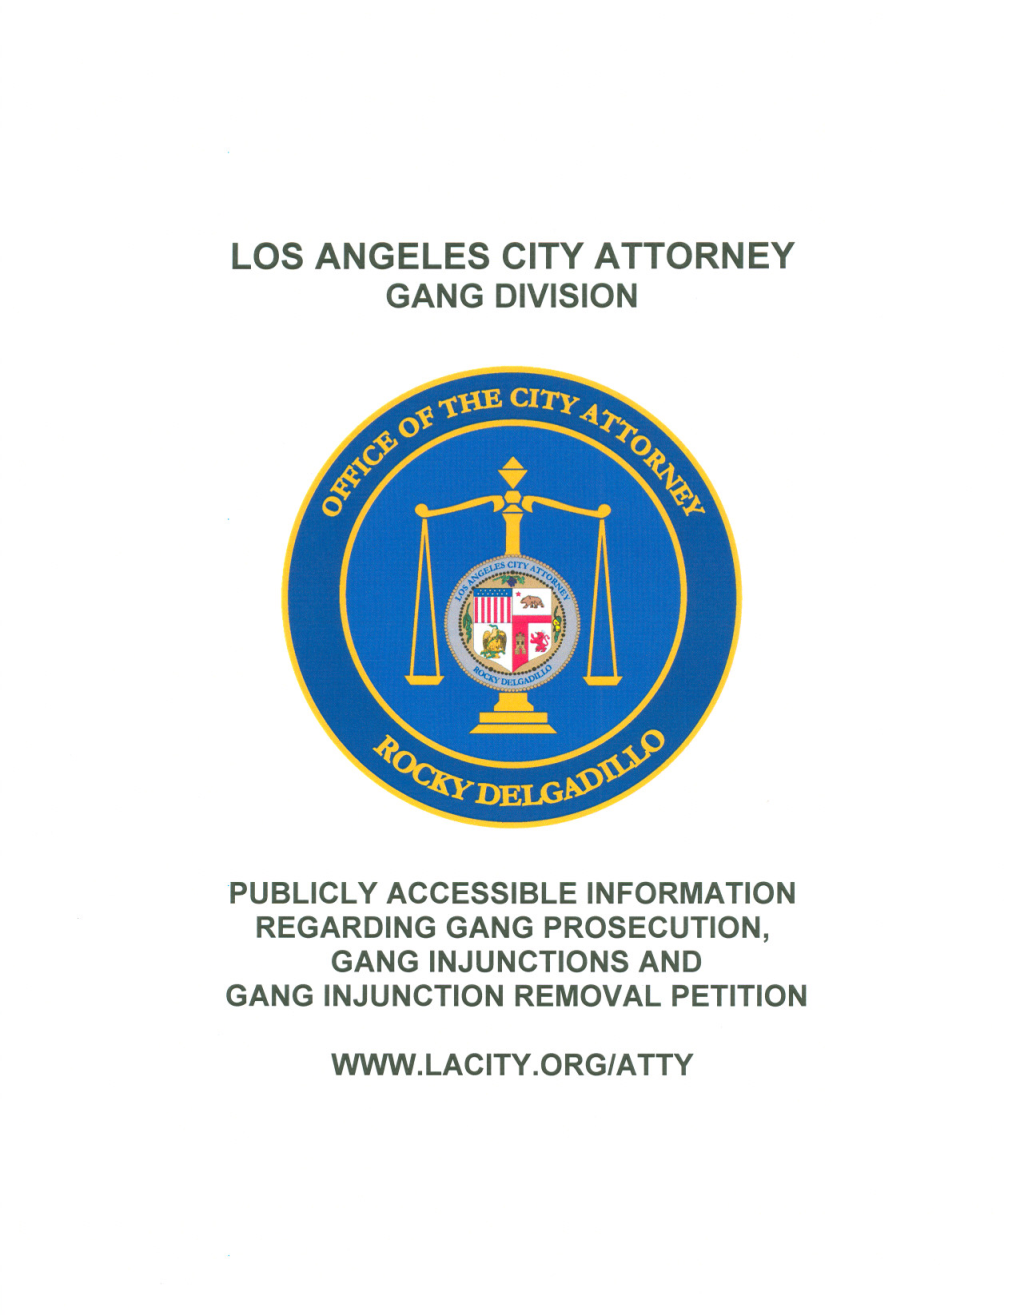 Los Angeles City Attorney Gang Division